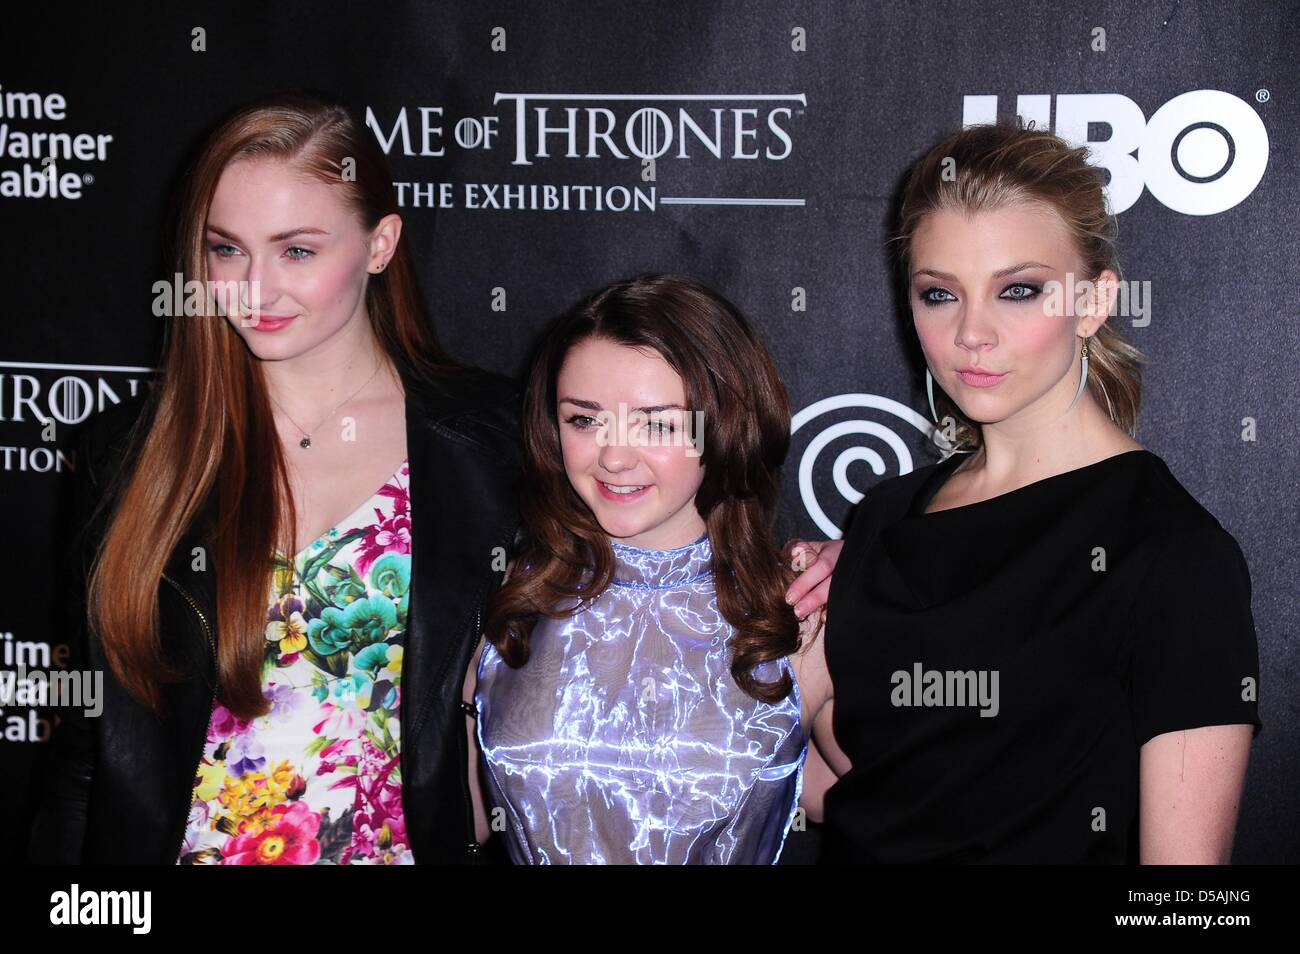 New York, USA. 27th March 2013. Sophie Turner, Maisie Williams, Natalie Dormer at arrivals for GAME OF THRONES: The Exhibition Opening Night, 3 West 57th Street, New York, NY March 27, 2013. Photo By: Gregorio T. Binuya/Everett Collection/Alamy Live News Stock Photo